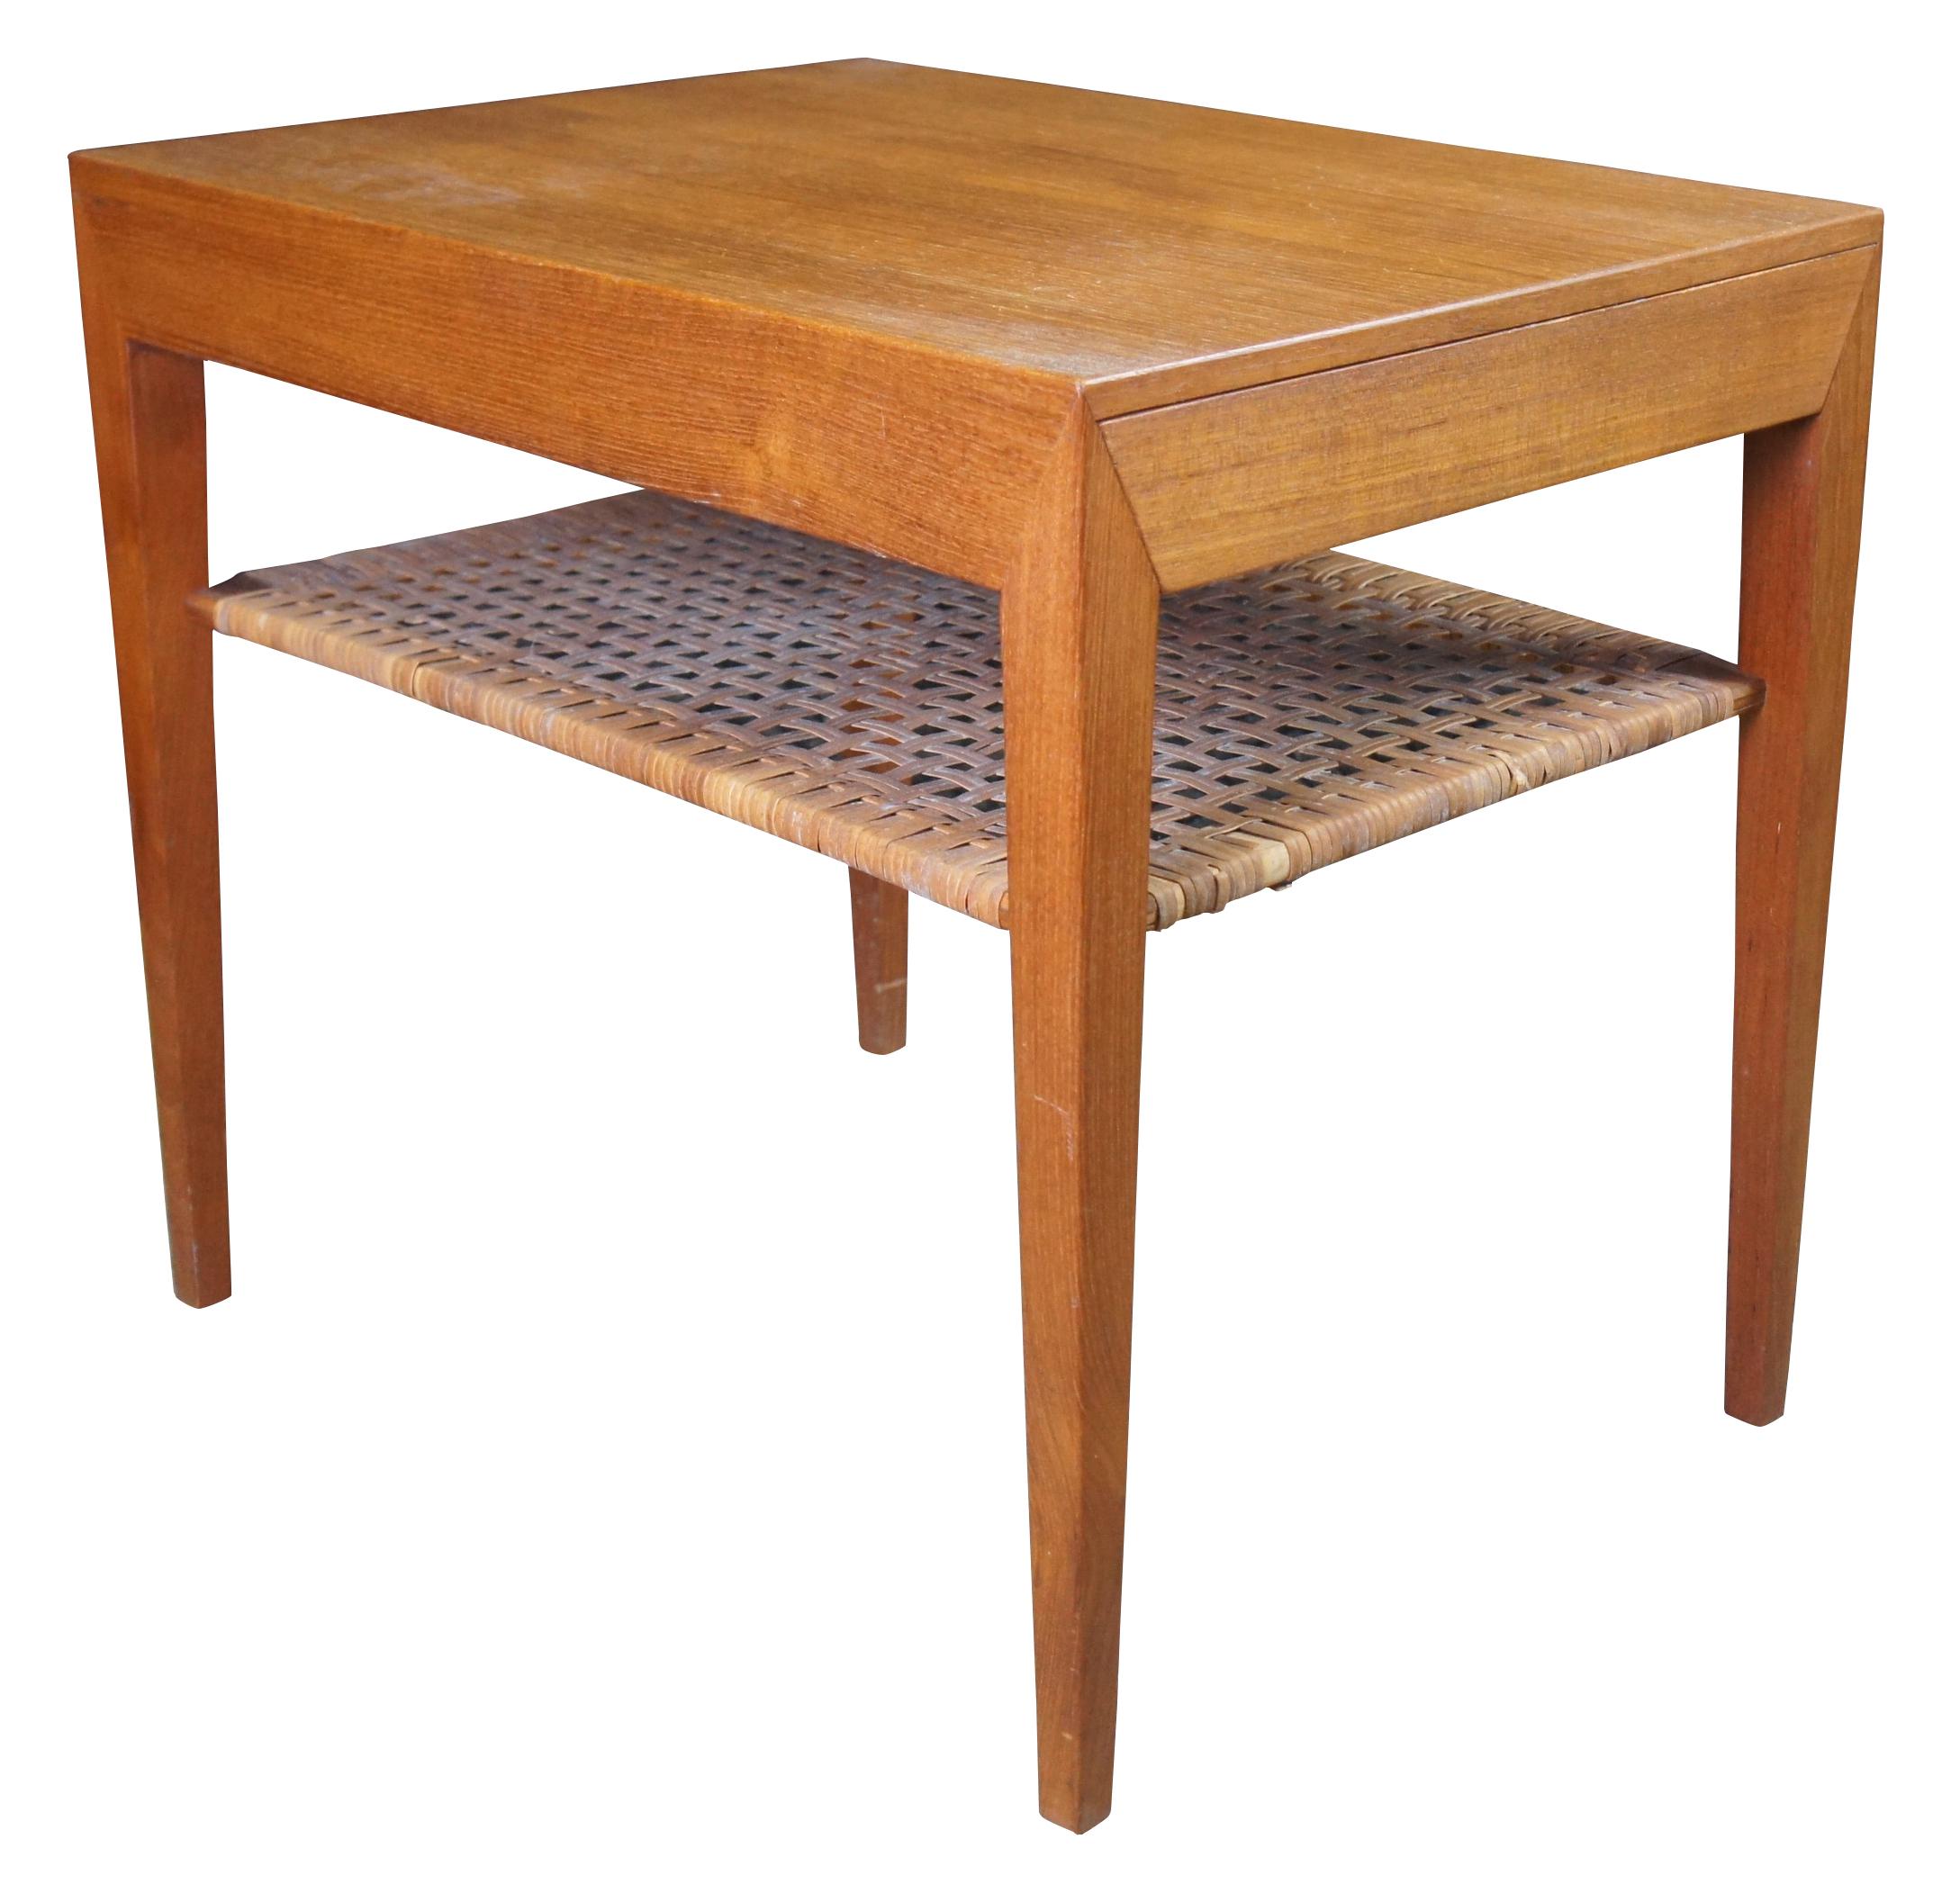 This stunning design was made in the 1950s by Danish Designer Severin Hansen Jr. for Haslev Møbelfabrik (Haslev Furniture), Denmark. The beautiful teak table features an integrated drawer and an elegant shelf in beautifully patinaed woven cane. An